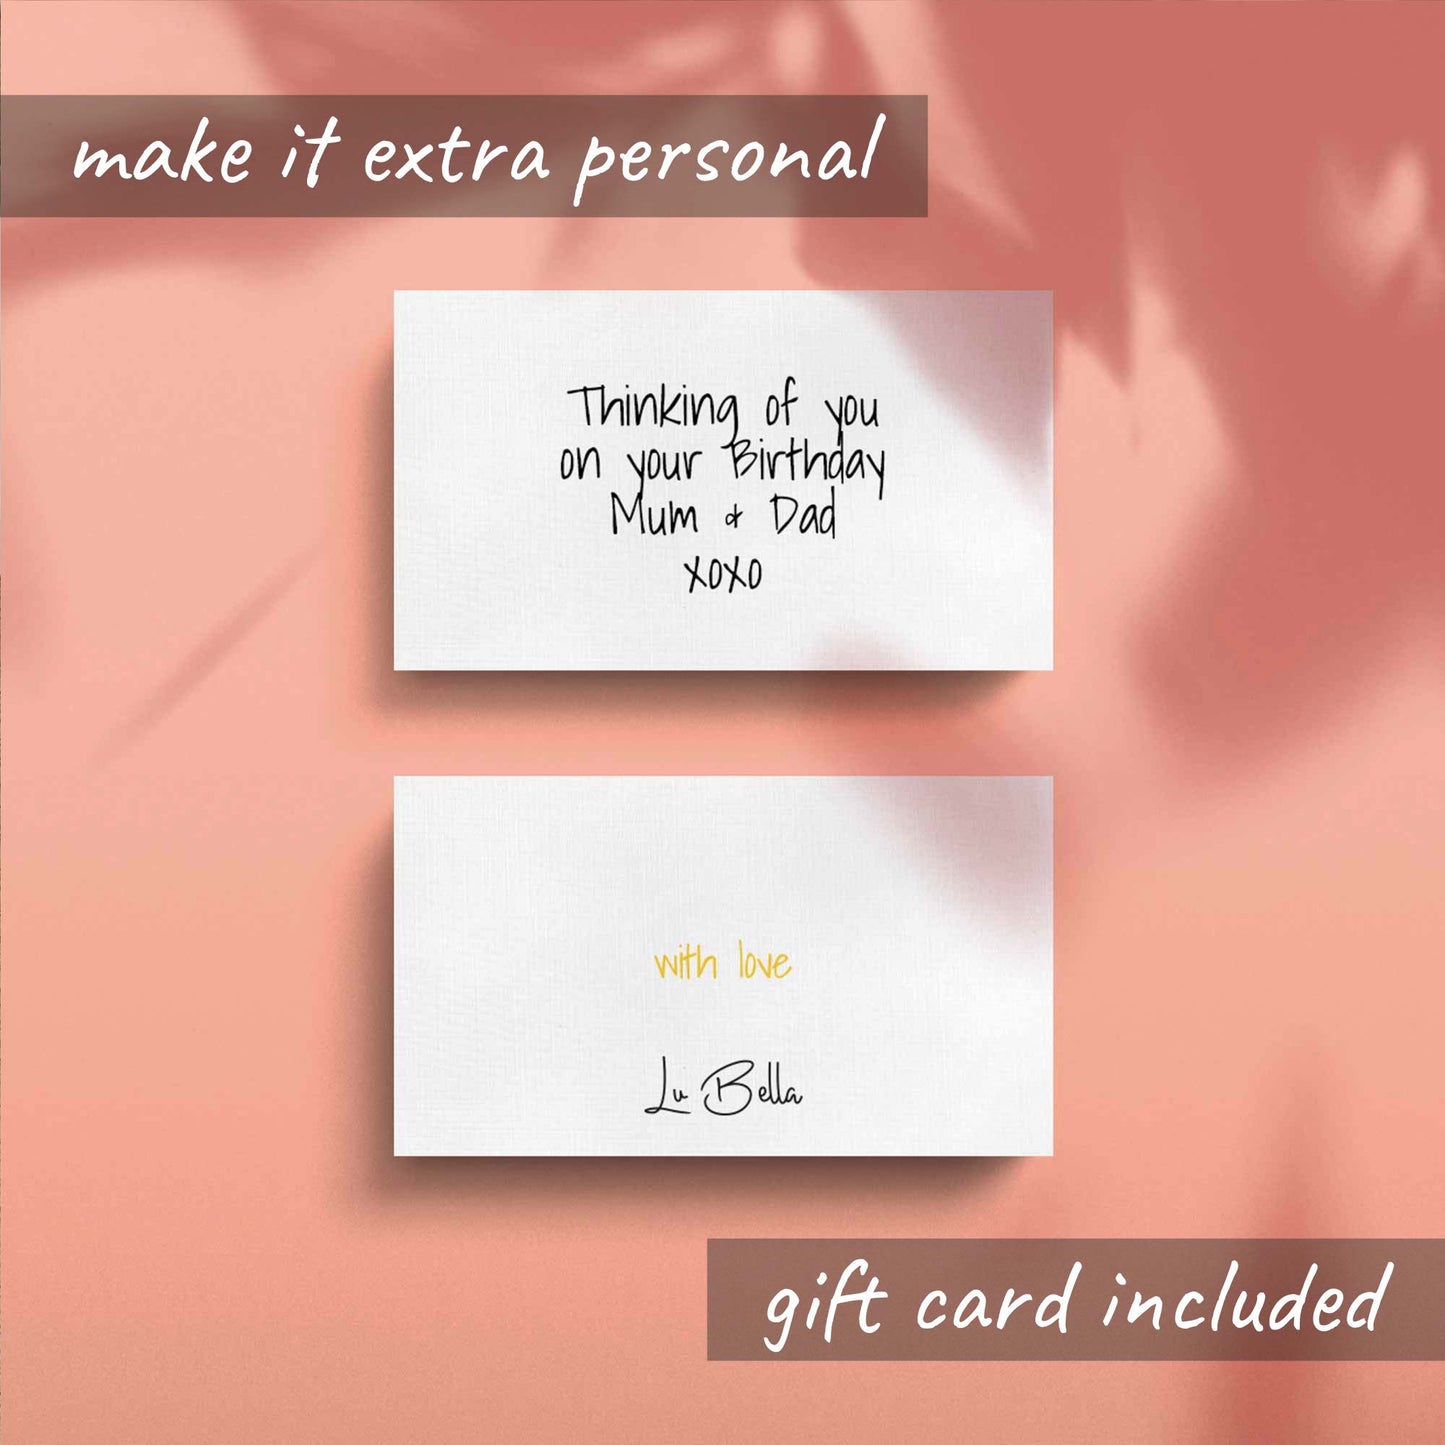 Includes Gift Card to write a personalised message